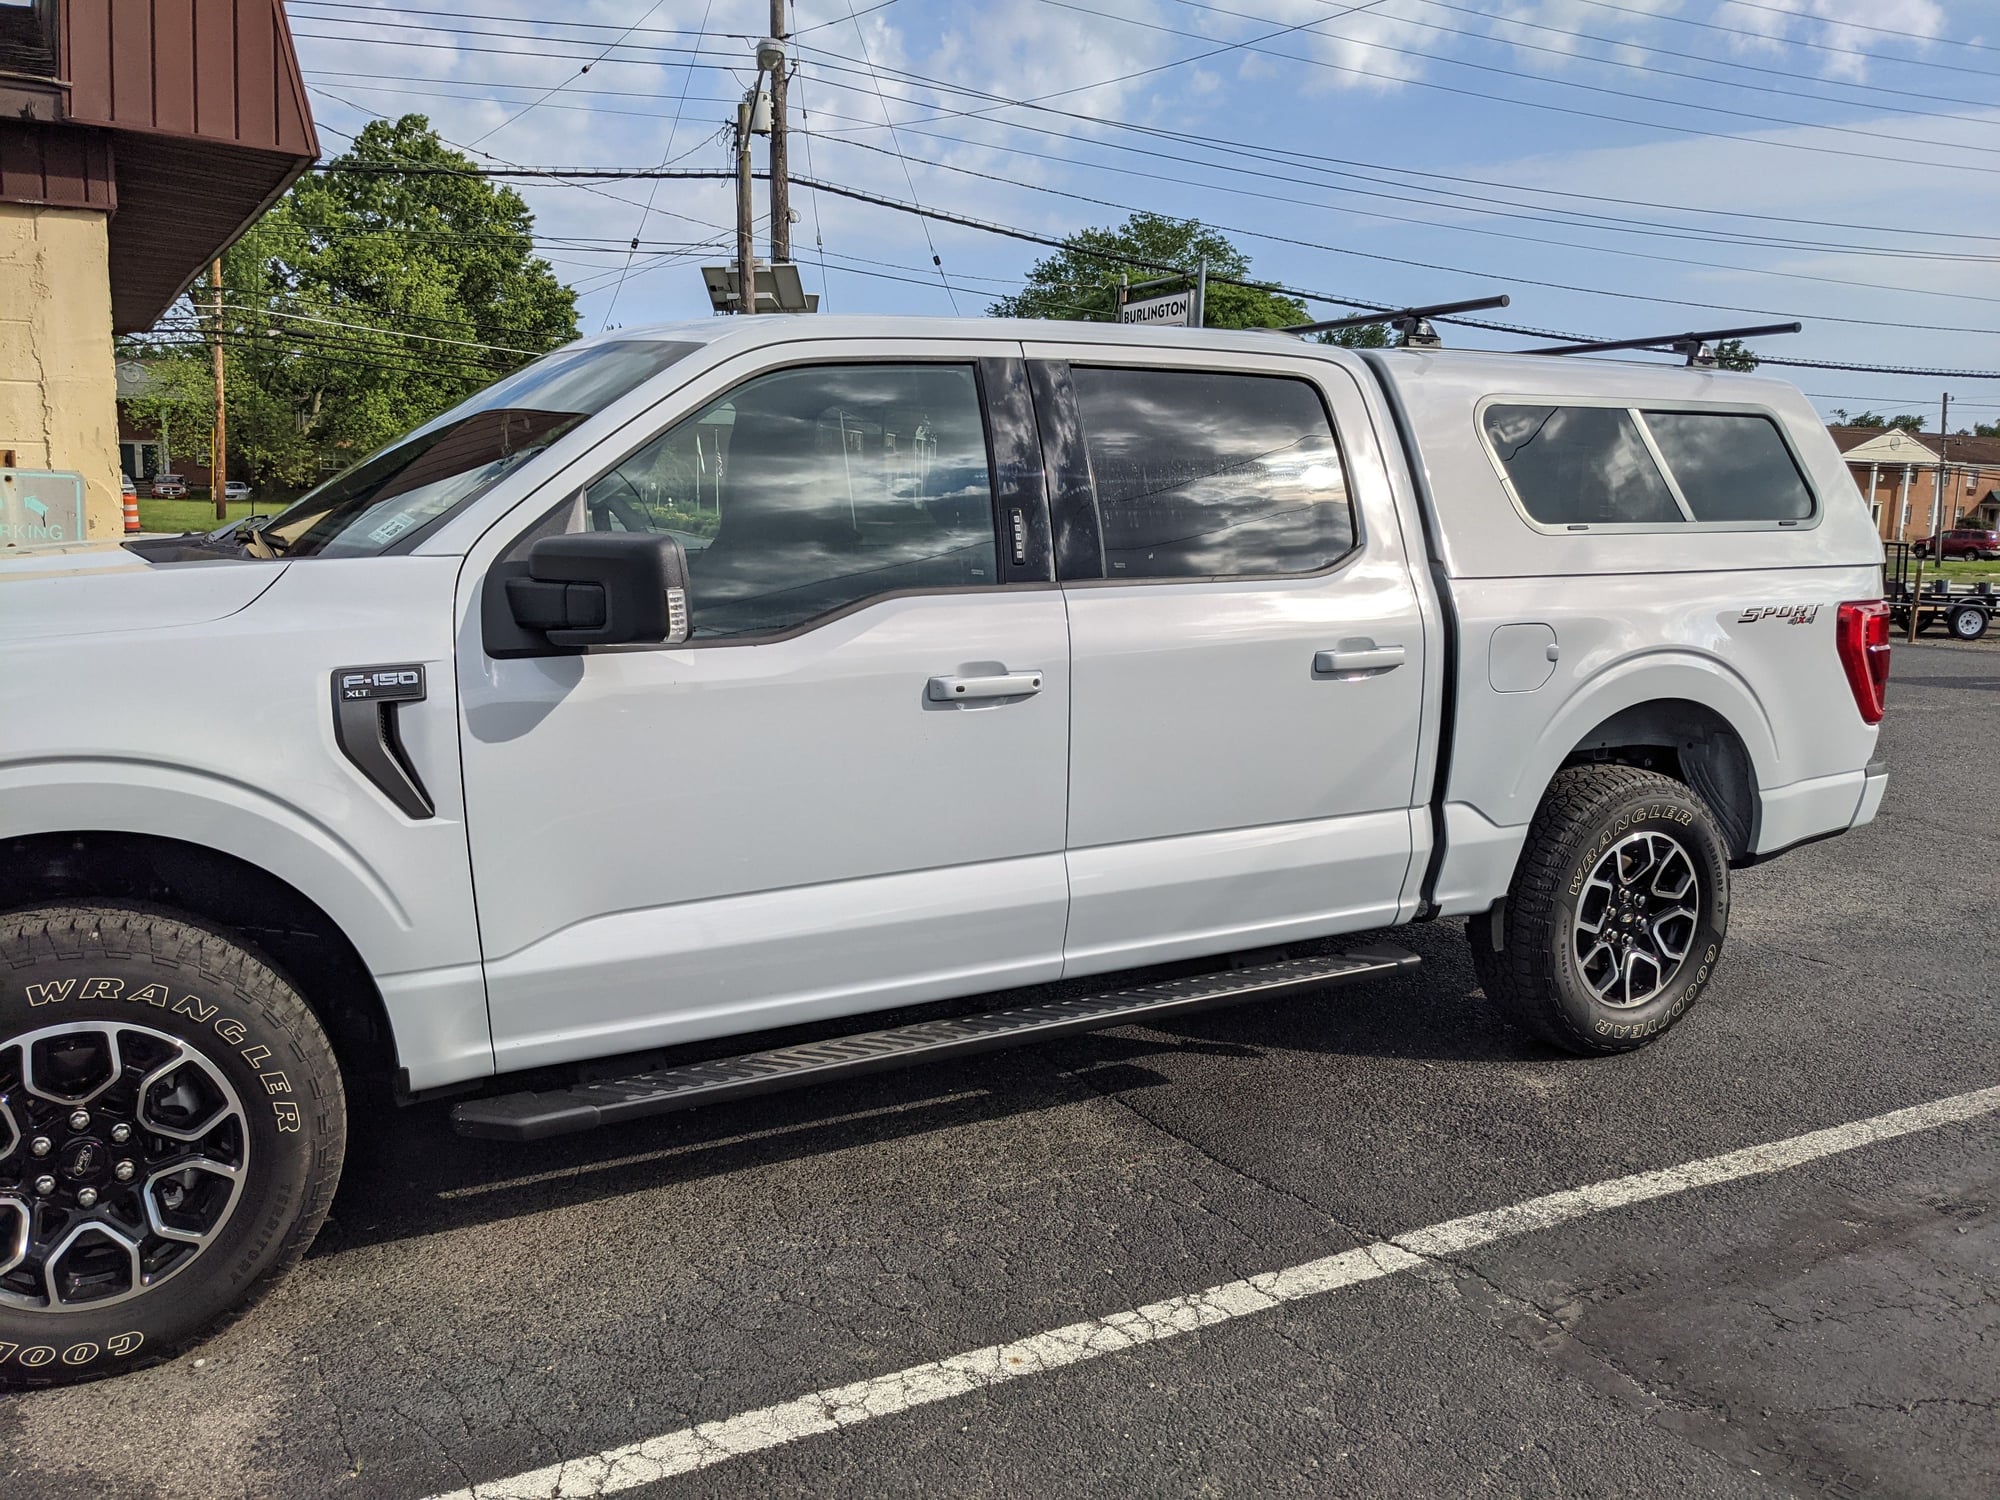 Bed covers and caps - Ford F150 Forum - Community of Ford Truck Fans